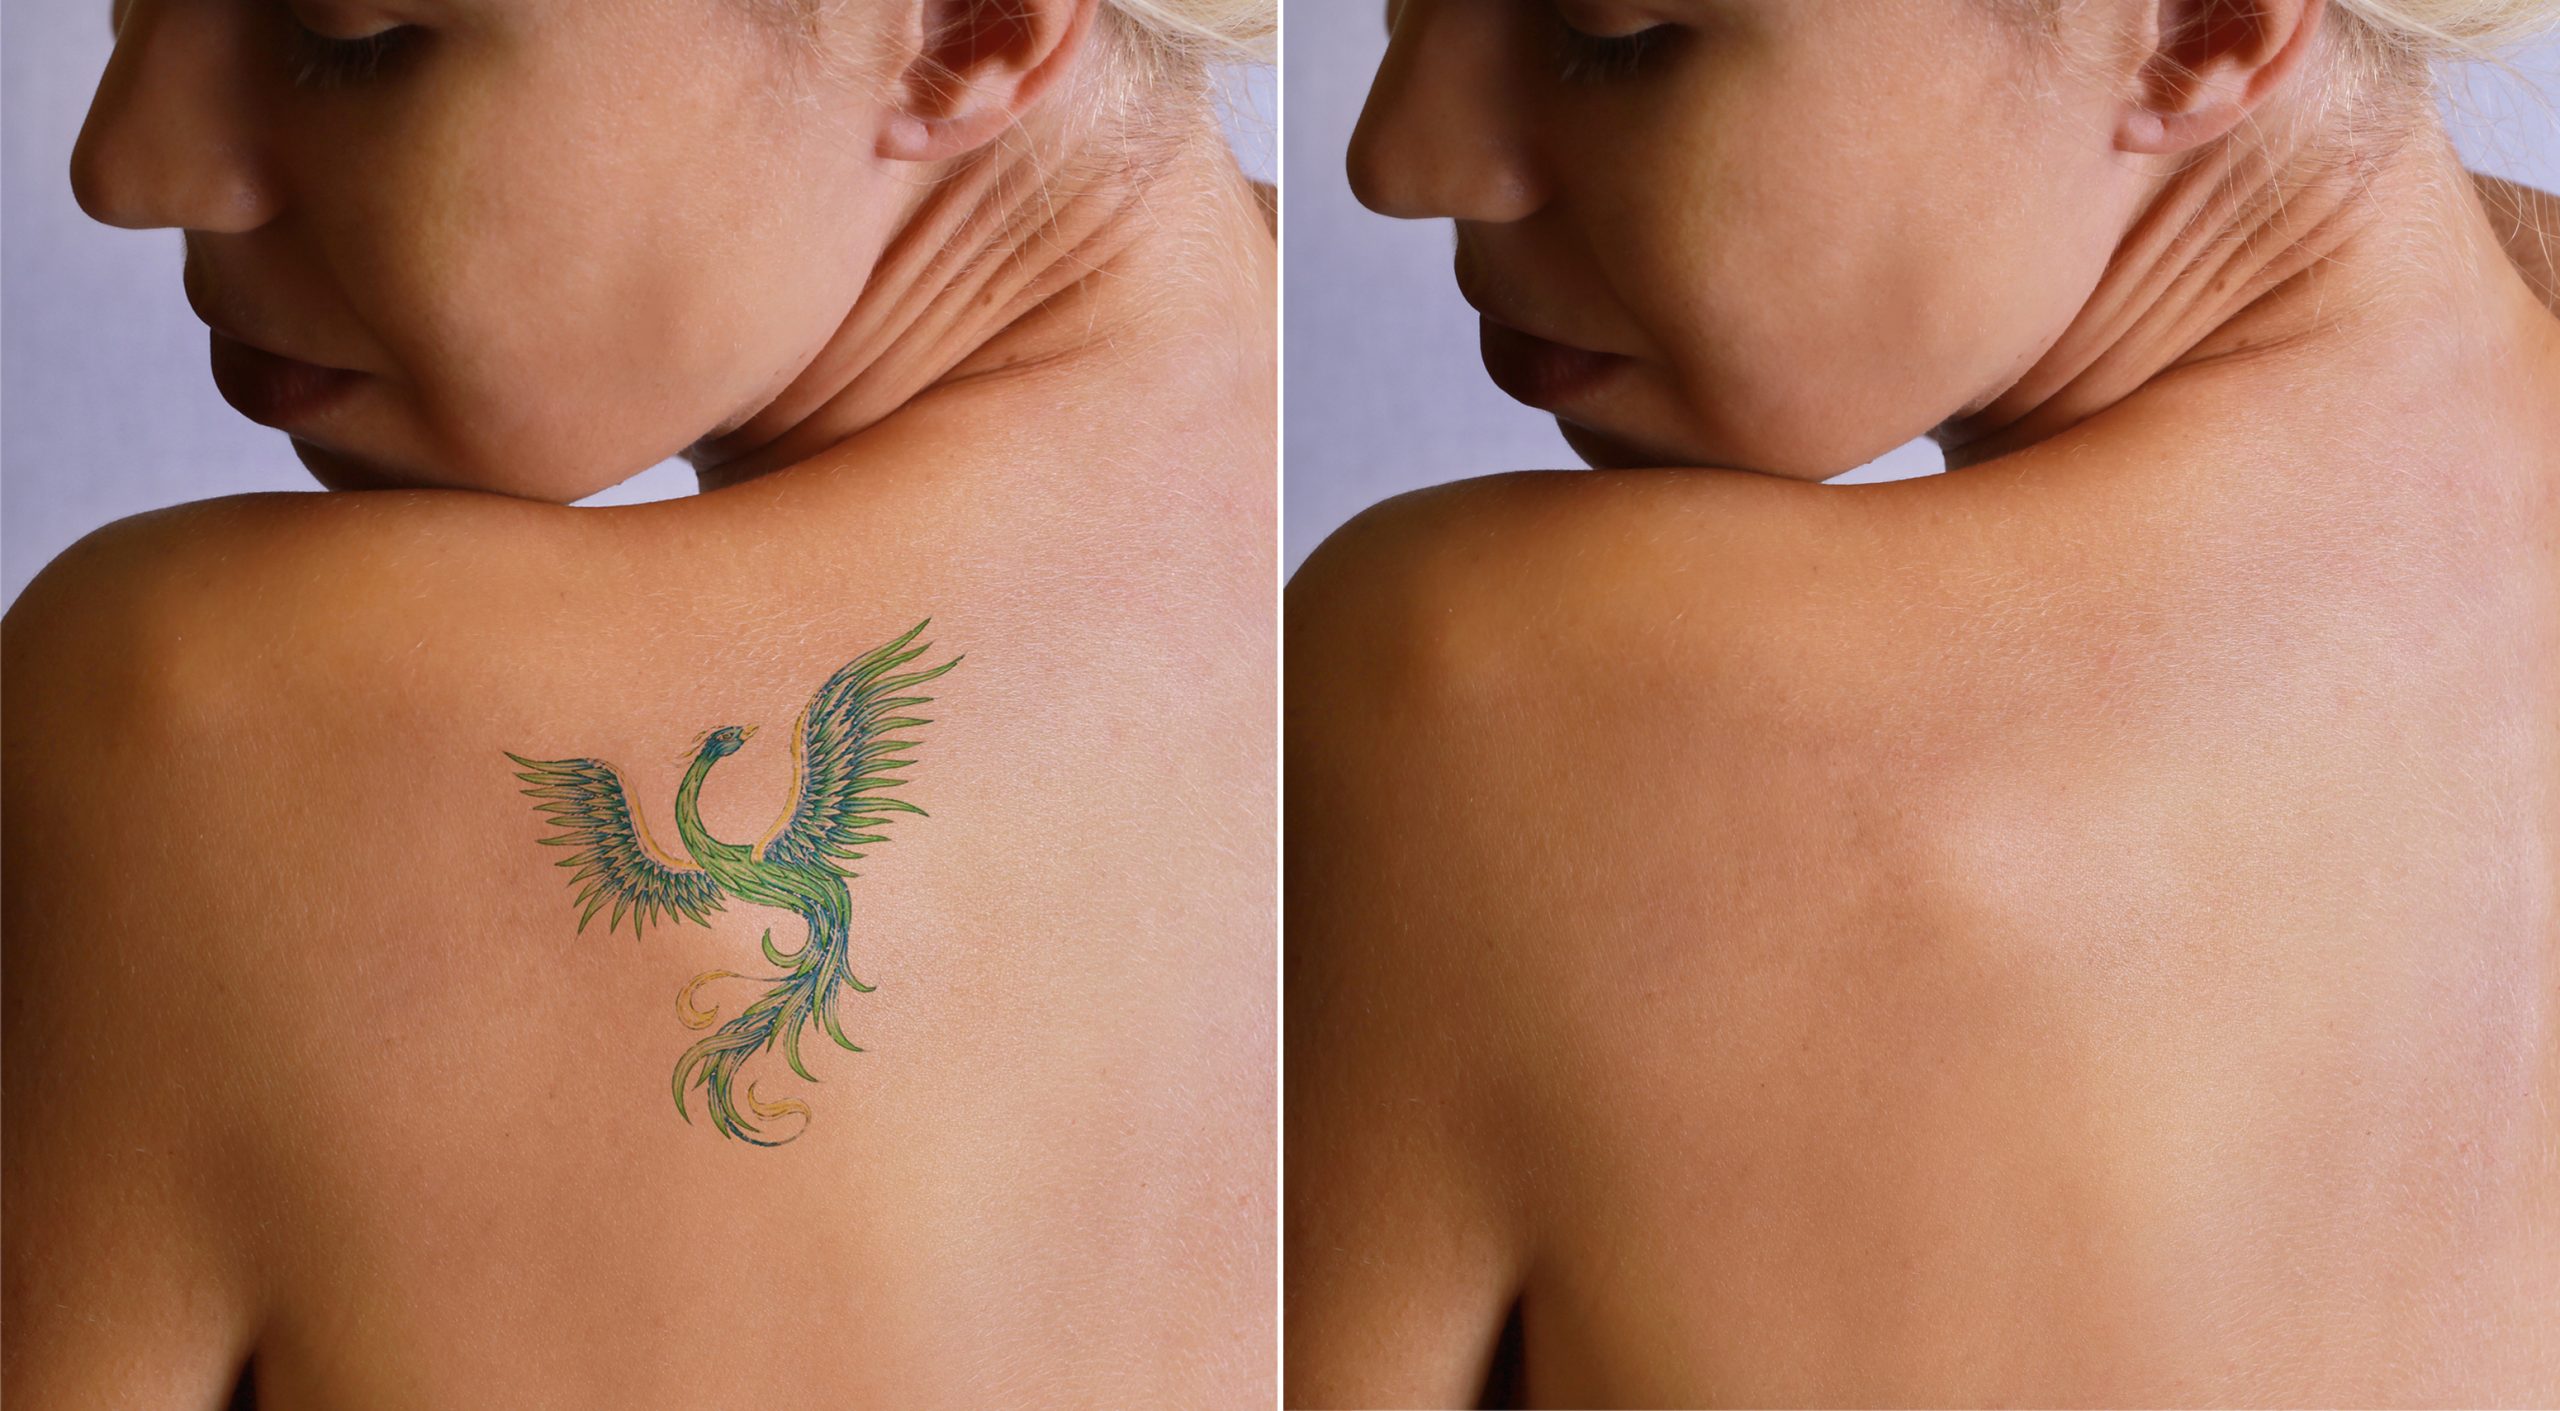 5 Signs That Tell You That it’s Time to Get a Tattoo Removed